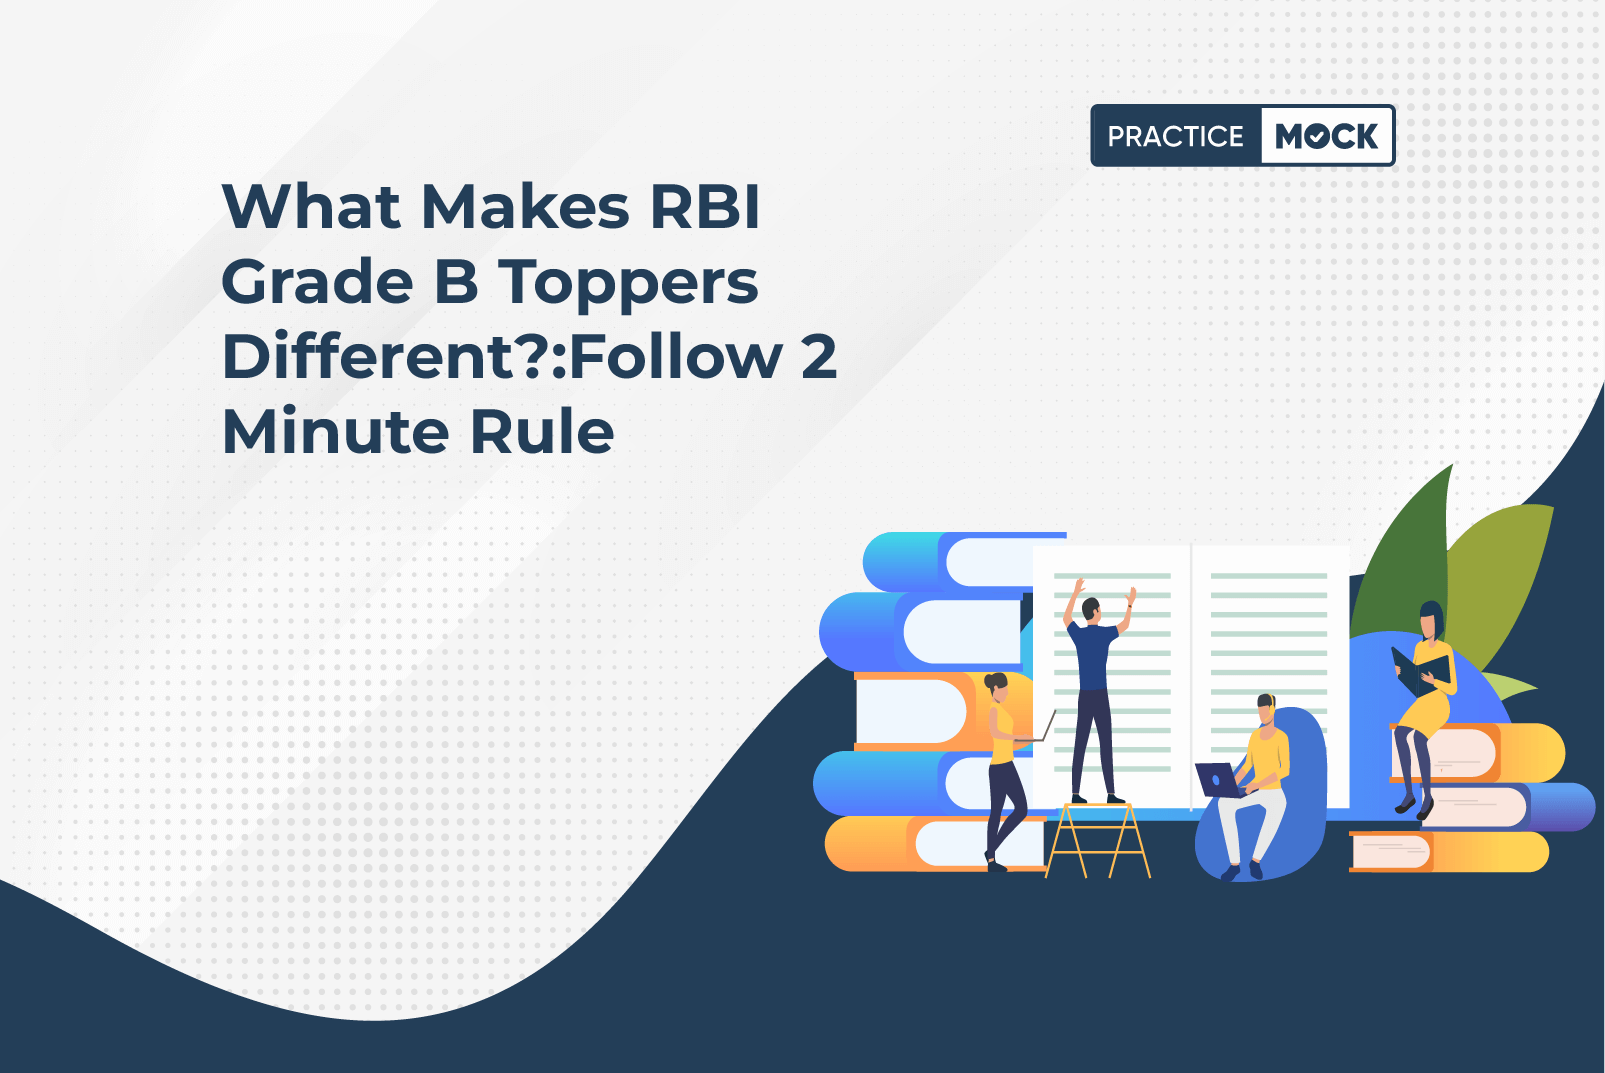 What Makes RBI Grade B Toppers DifferentFollow 2 Minute Rule